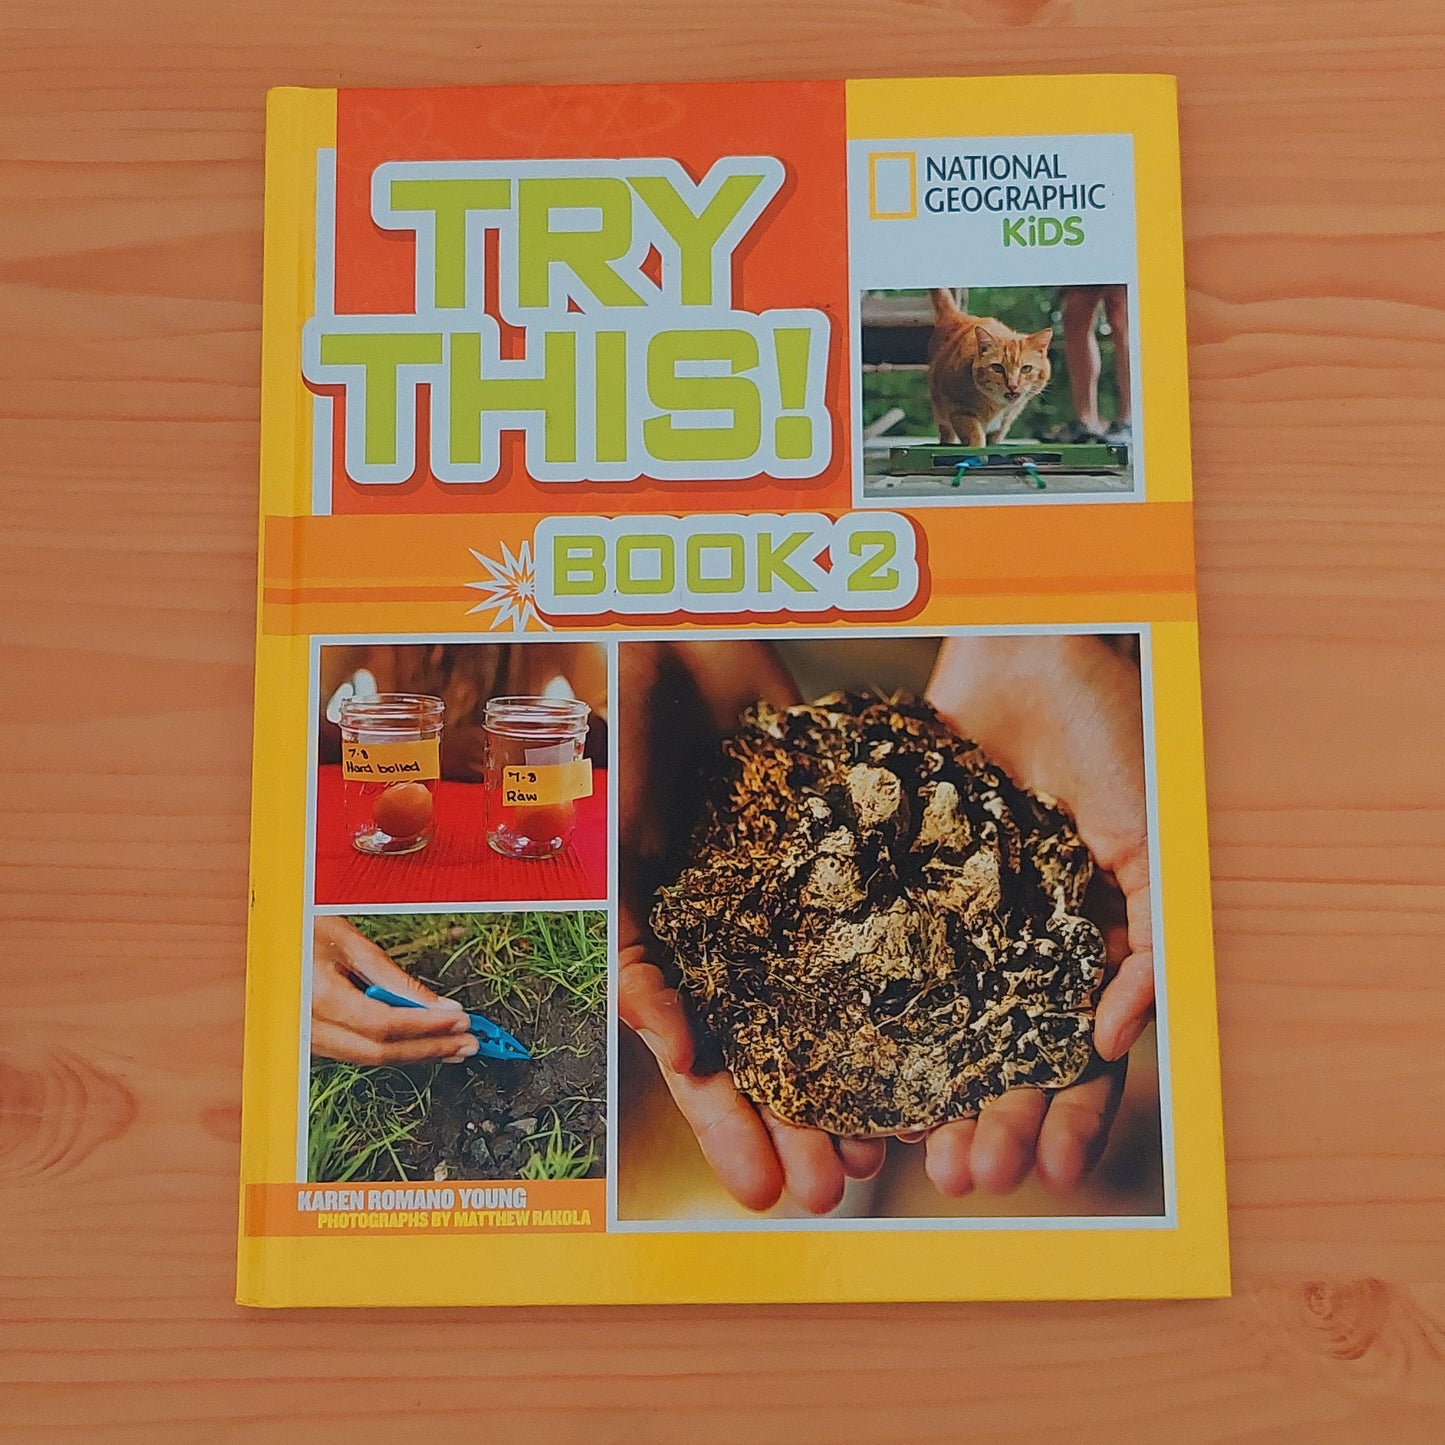 Try This! Book 2 (National Geographic Kids)